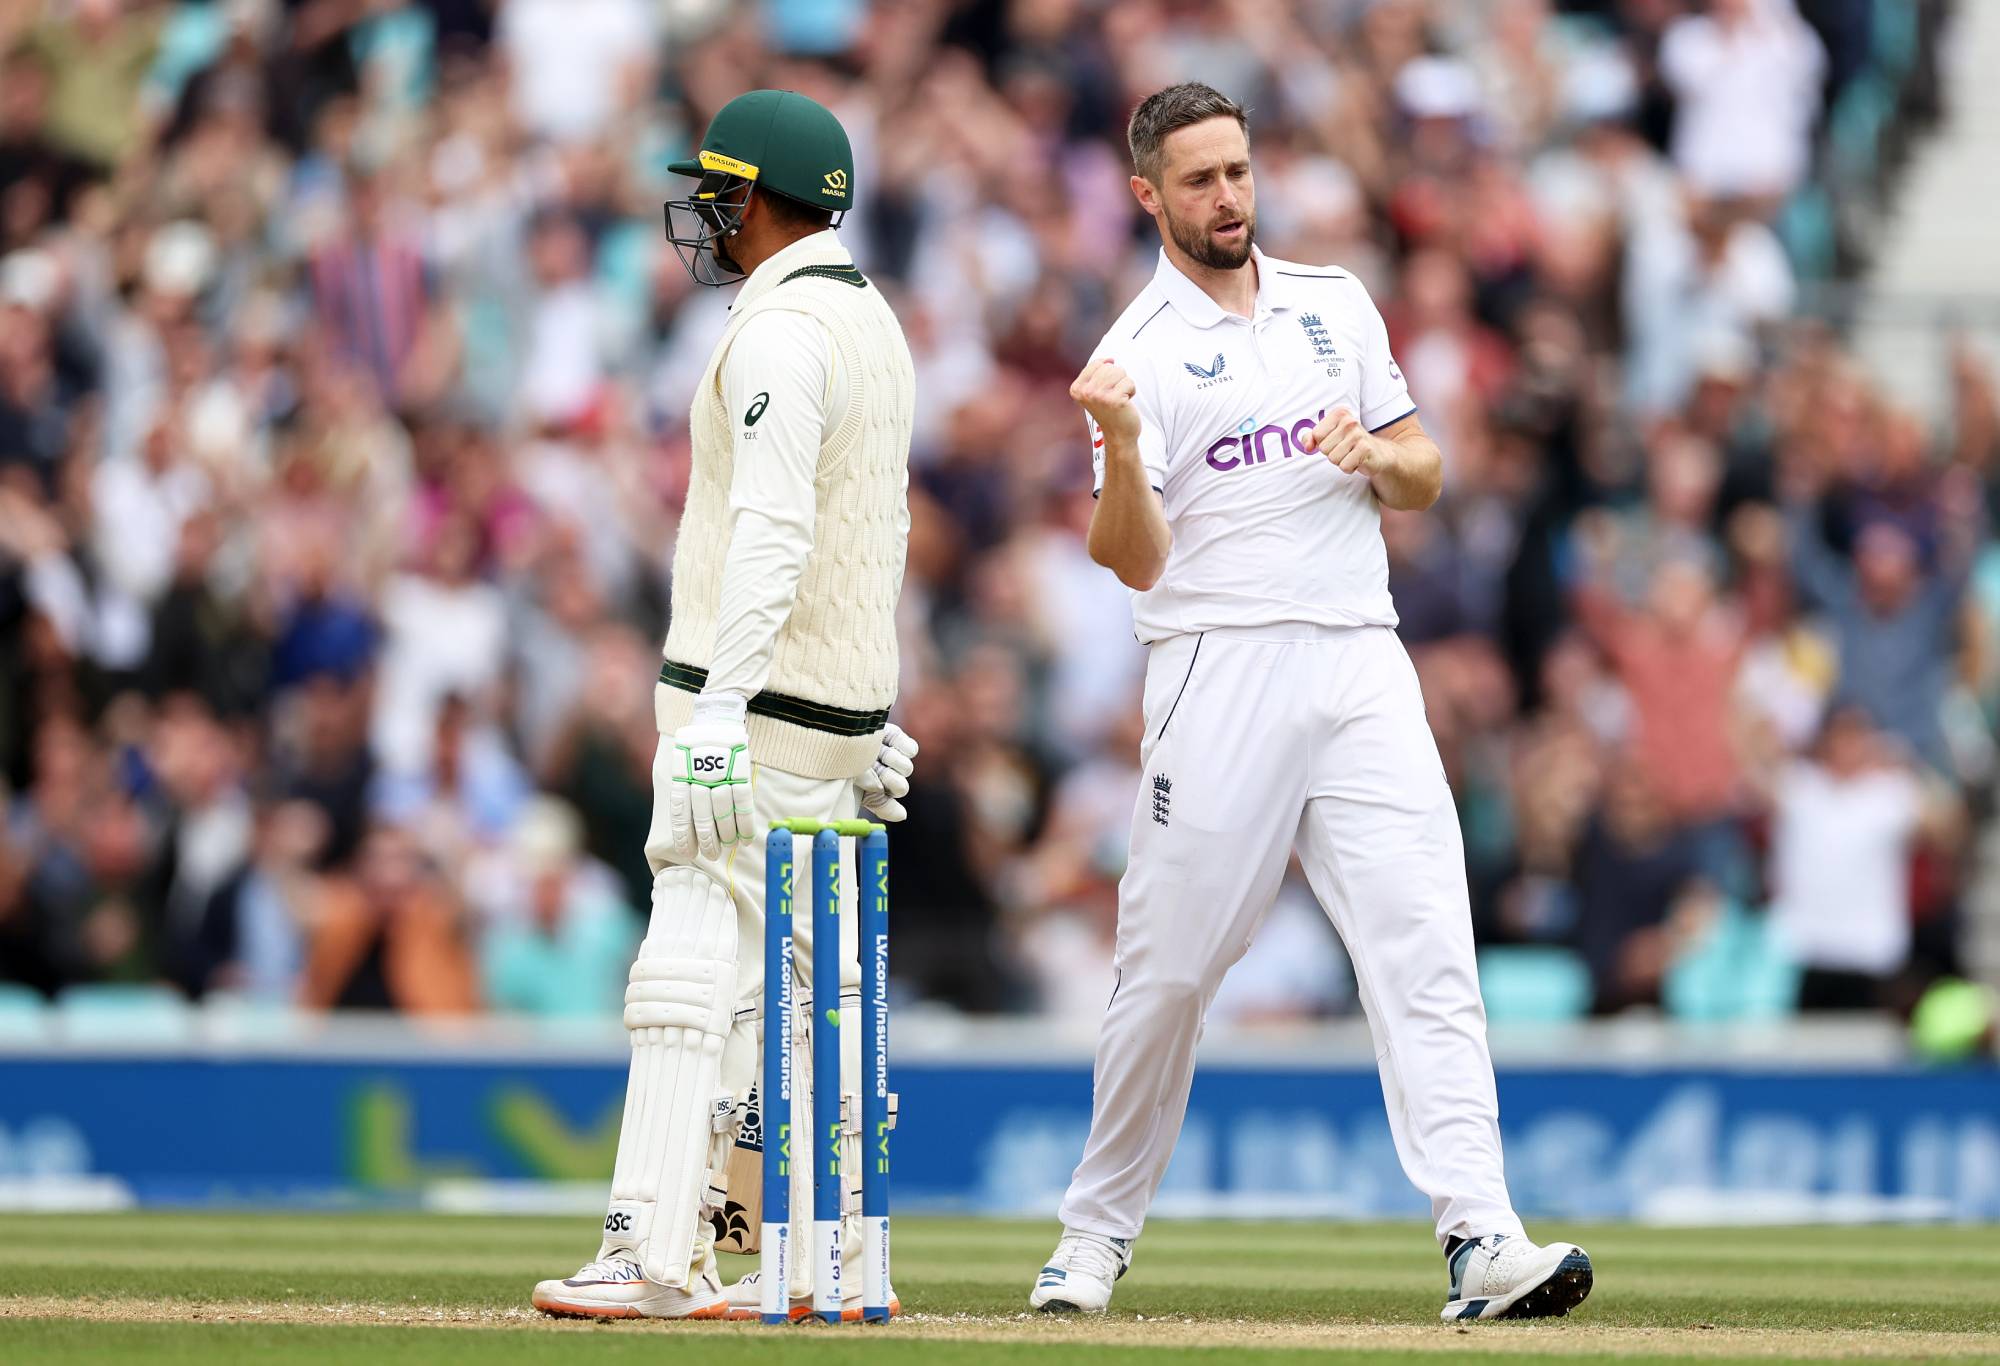 LONDON, ENGLAND - JULY 31: Chris Woakes of England celebrates the wicket of Usman Khawaja of Australia during Day Five of the LV= Insurance Ashes 5th Test Match between England and Australia at The Kia Oval on July 31, 2023 in London, England. (Photo by Ryan Pierse/Getty Images)